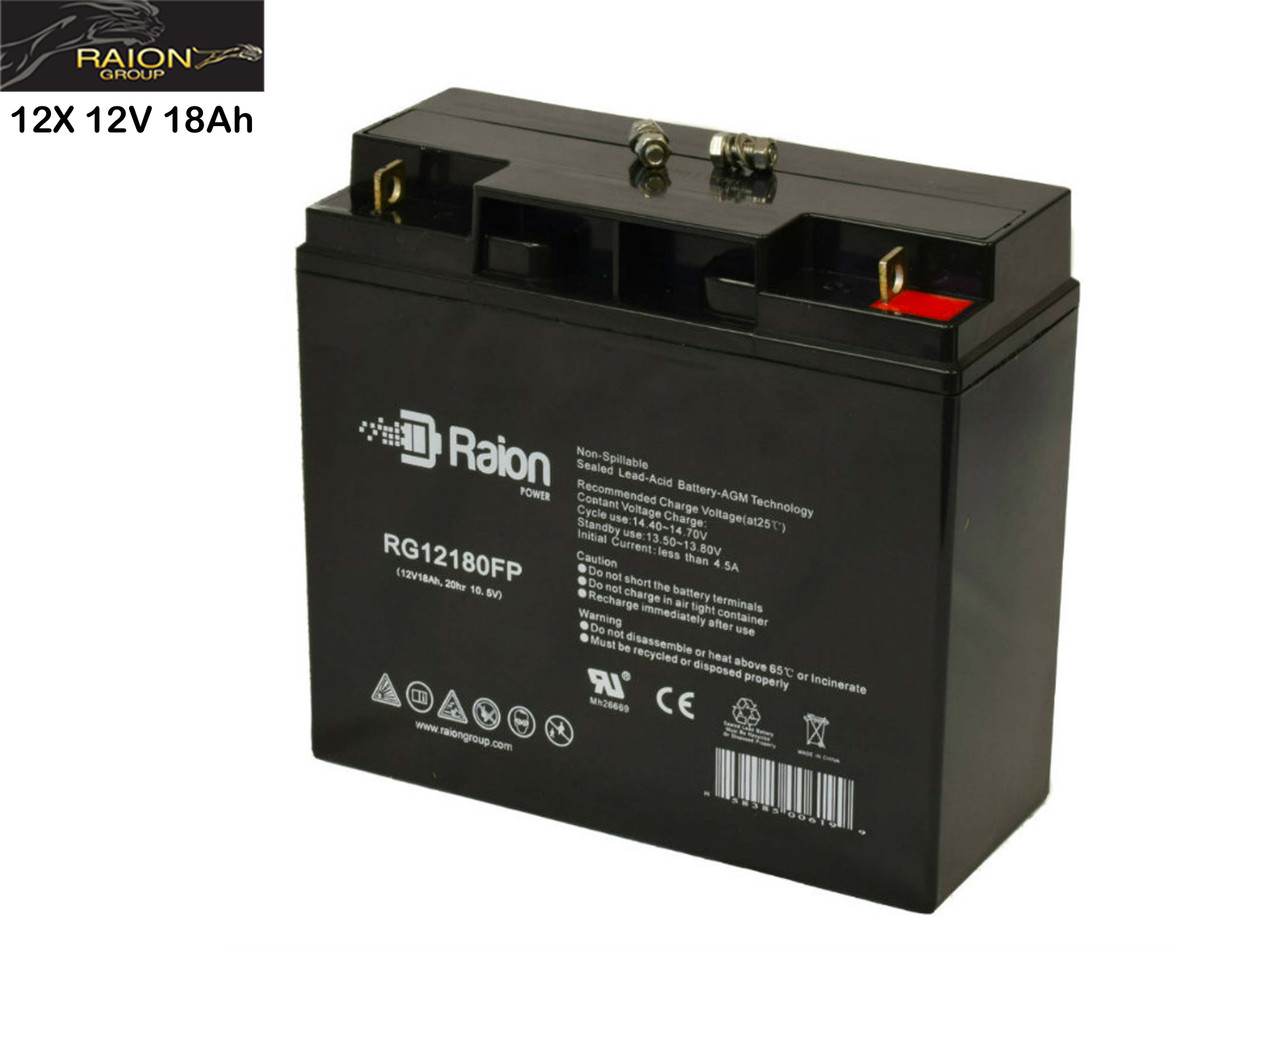 Raion Power Replacement 12V 18Ah RG12180FP Battery for Picker International Techmobile Portable X-Ray - 12 Pack